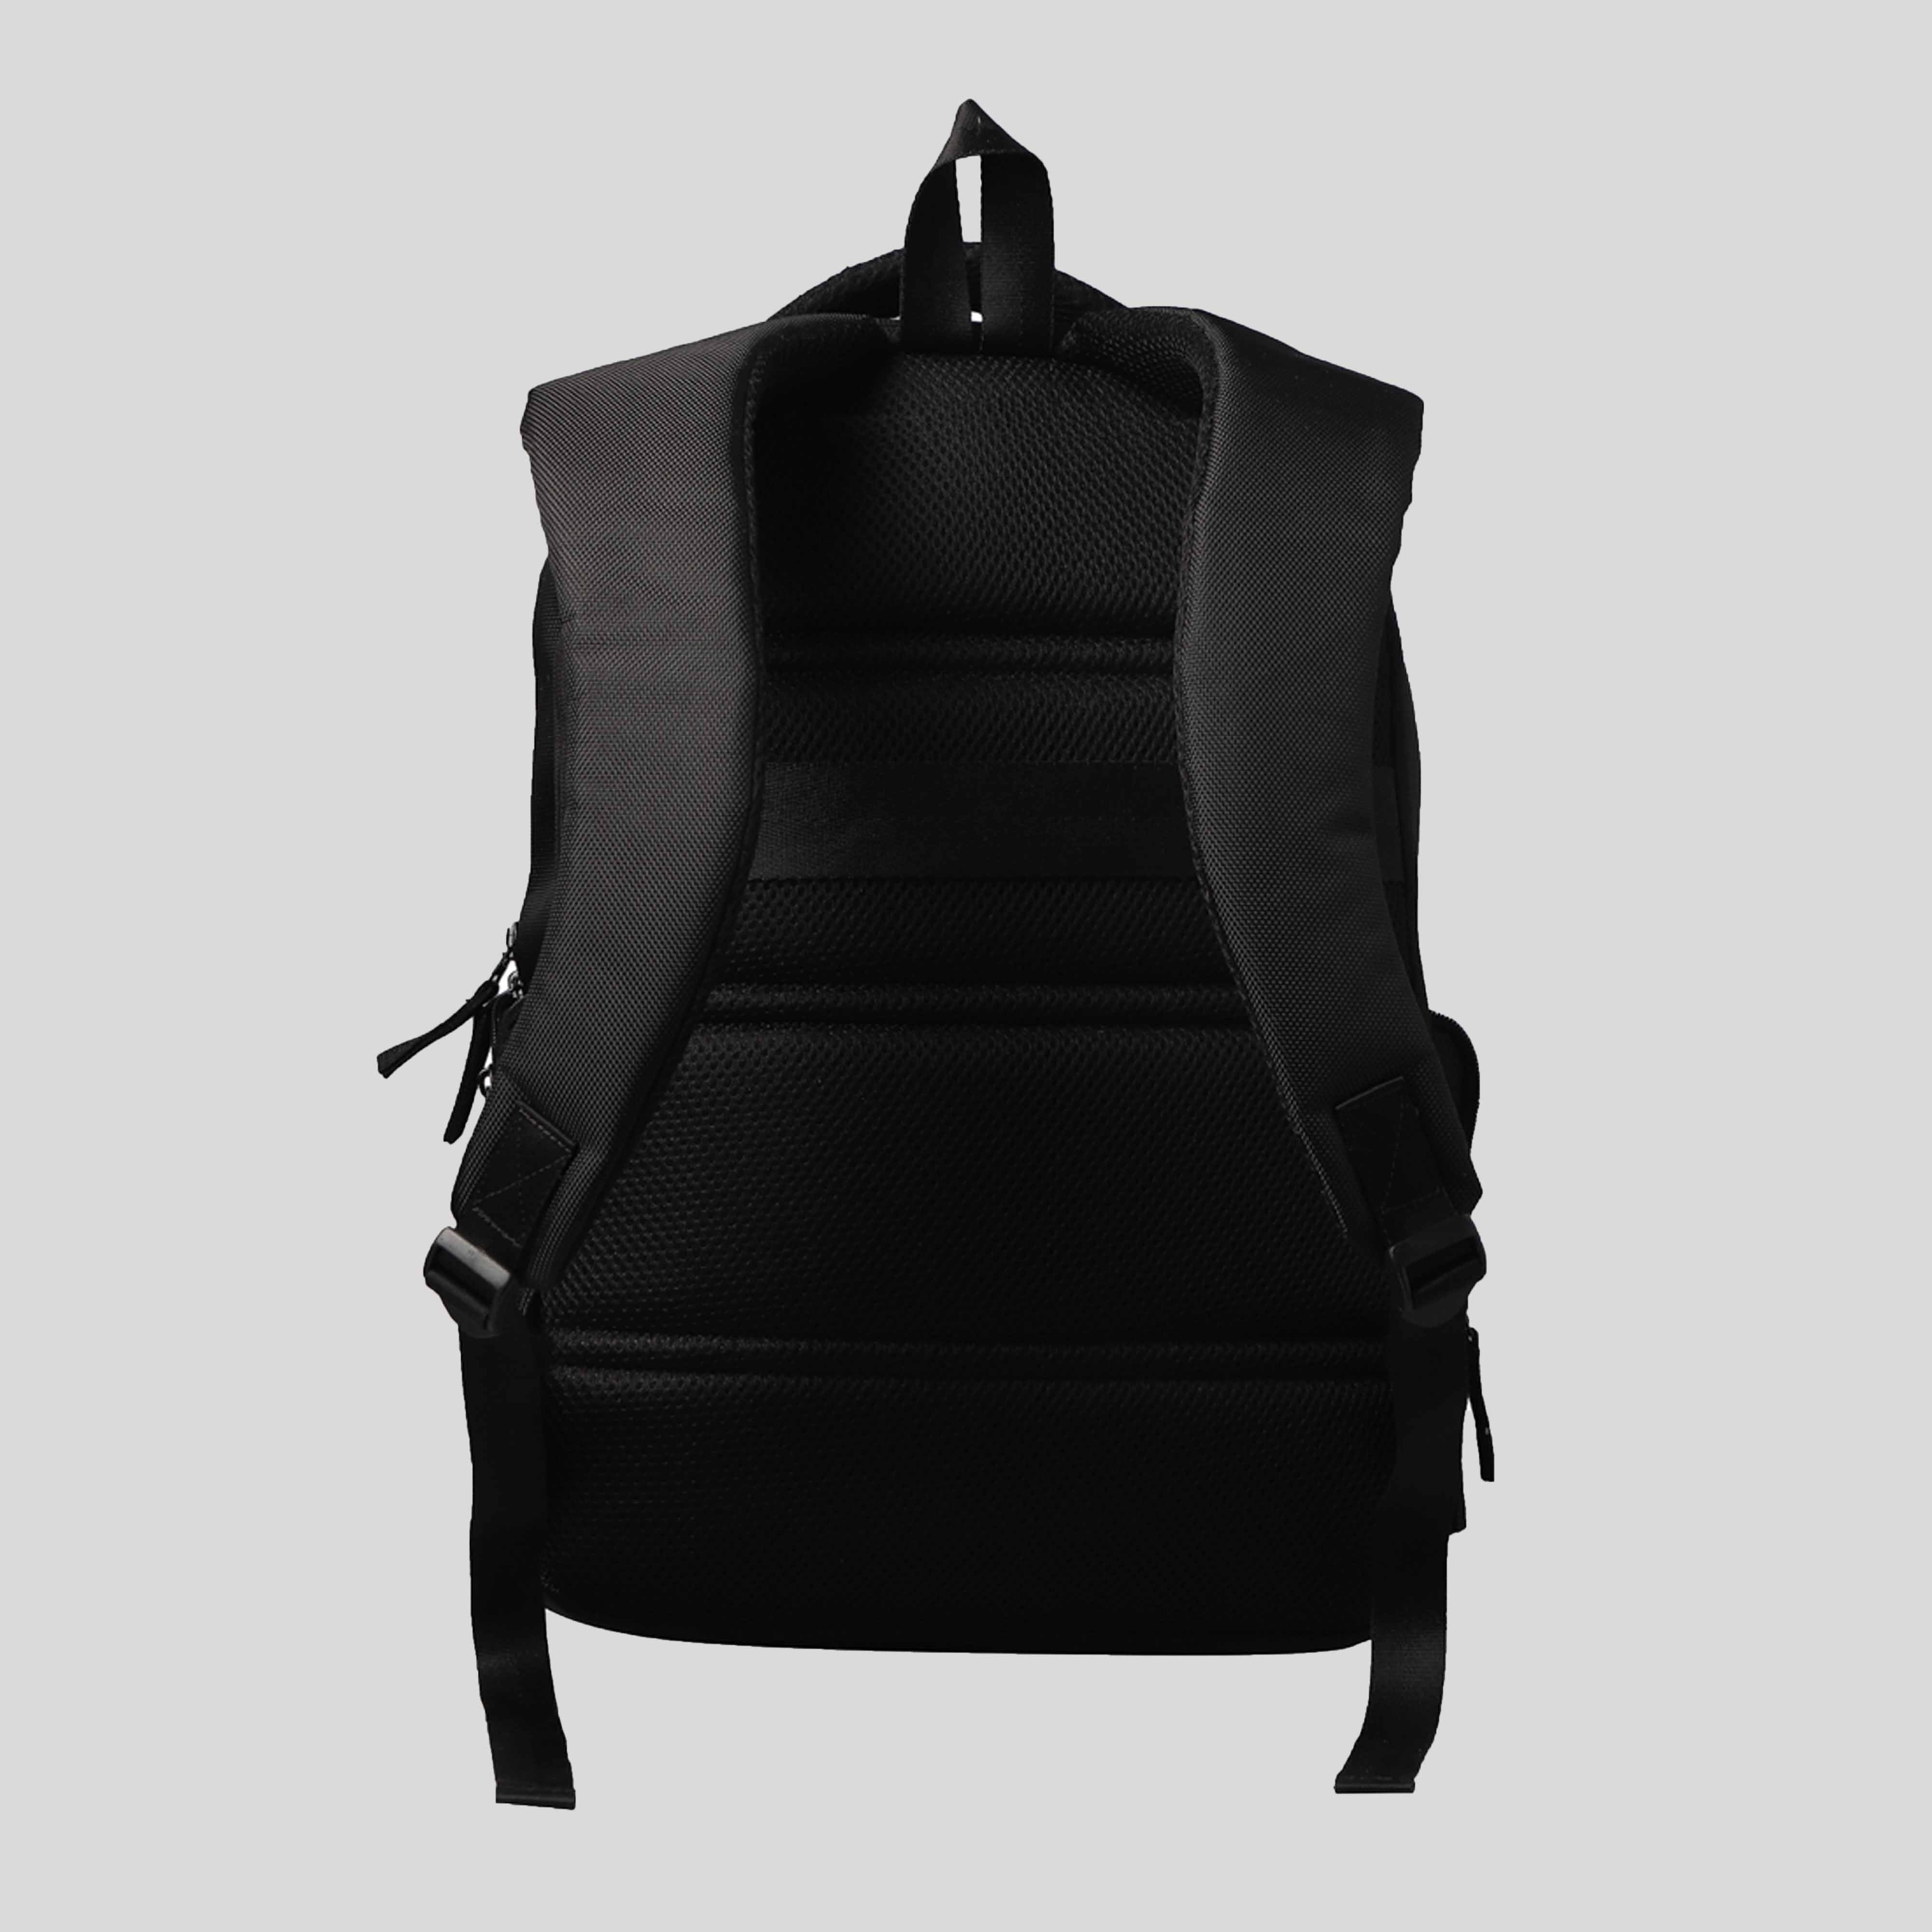 The Black Almighty Backpack